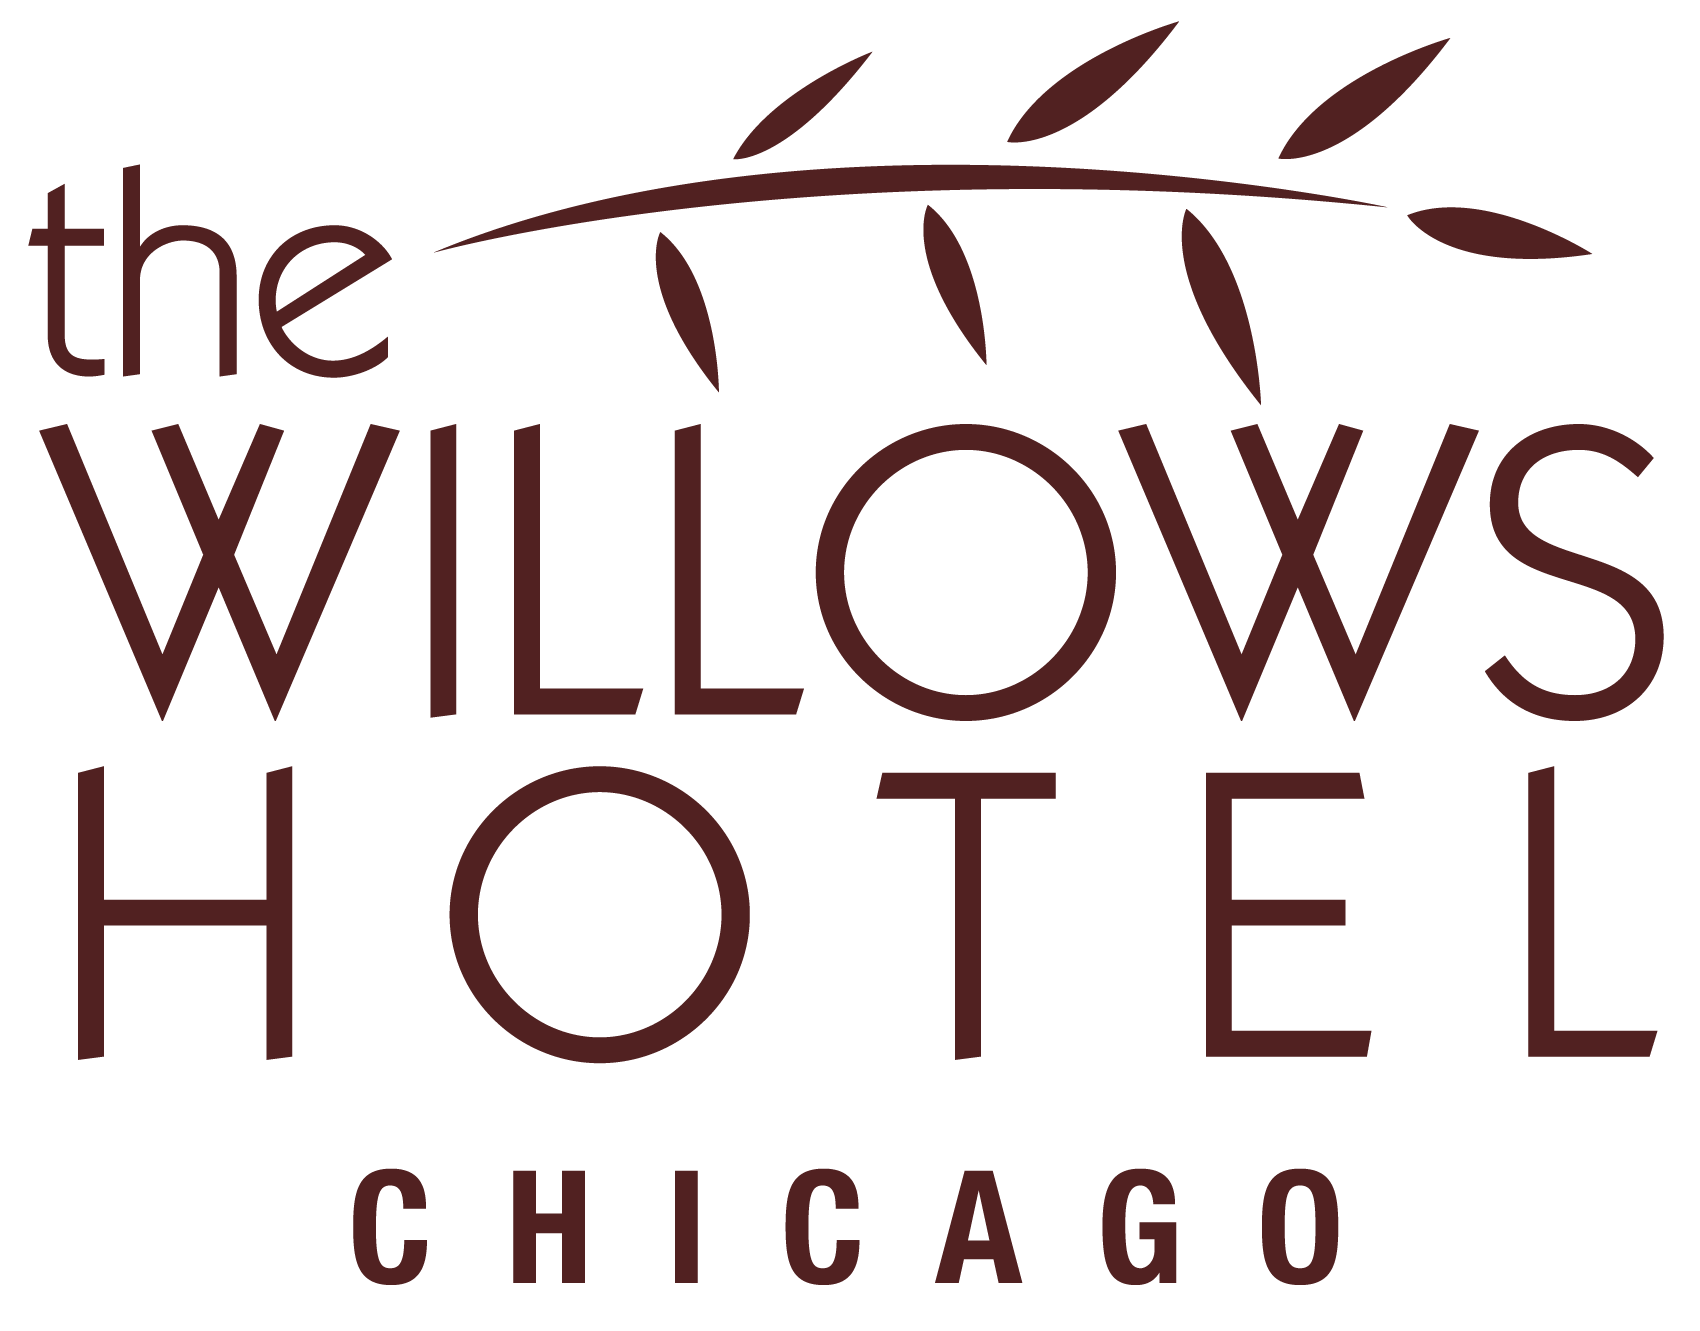 The Willows Hotel Chicago